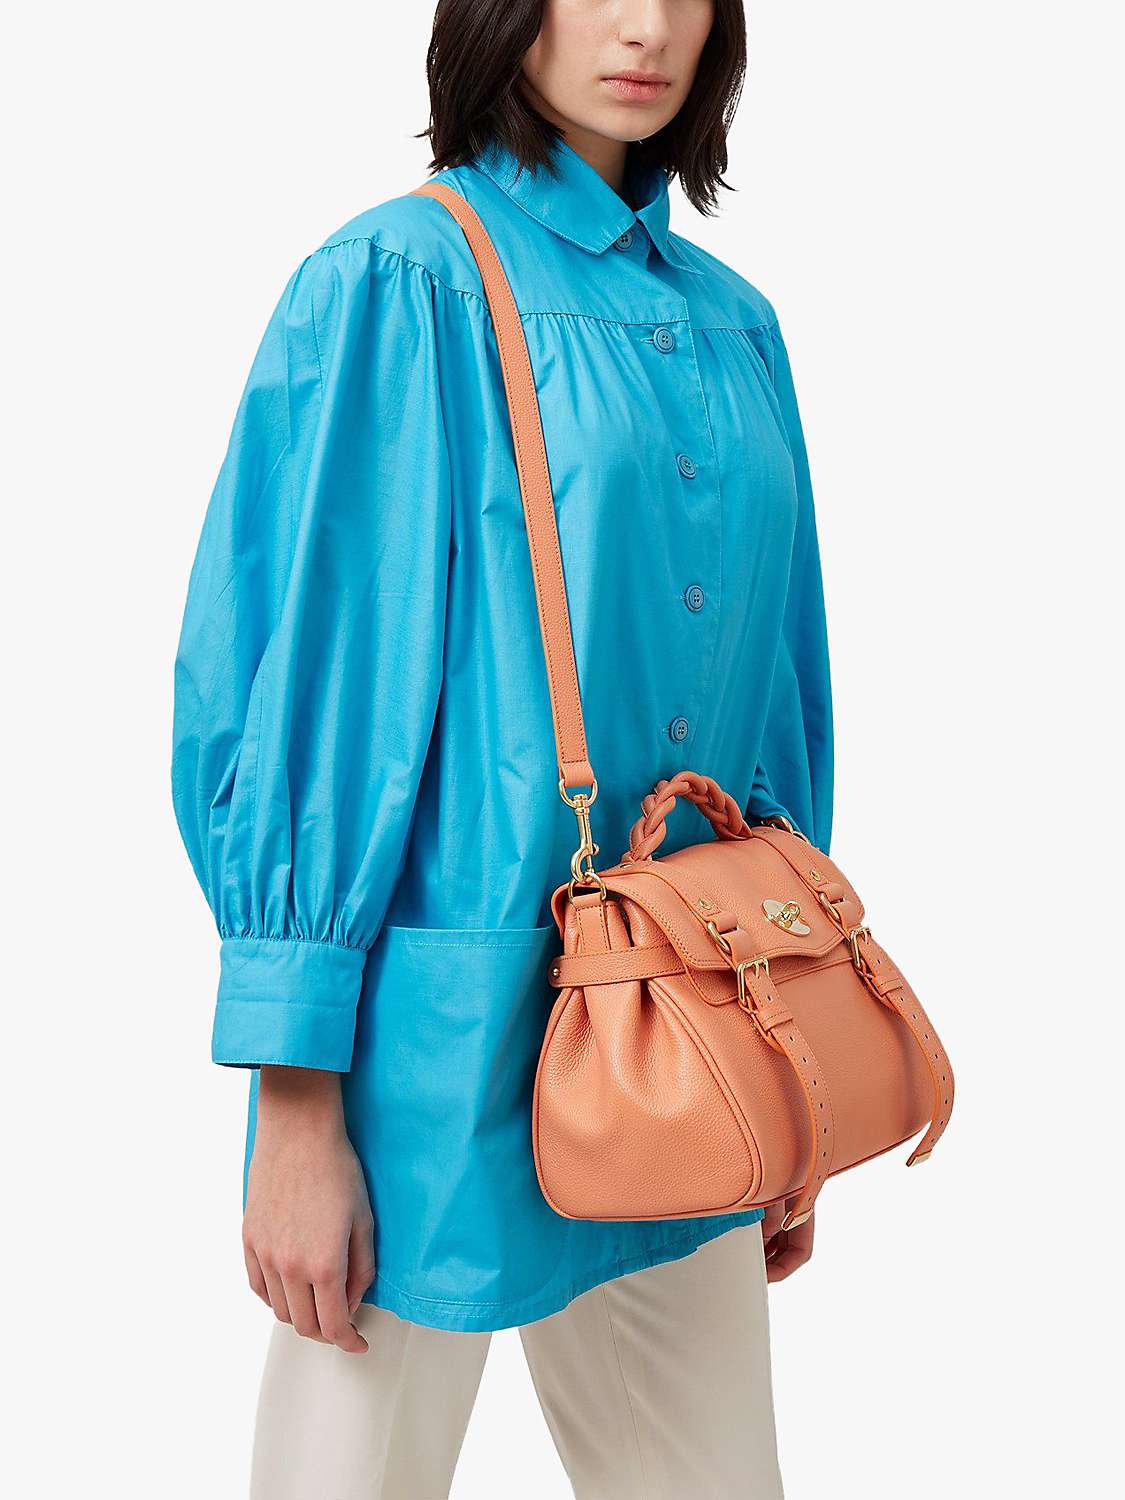 Buy Mulberry Alexa Small Classic Grain Leather Shoulder Bag Online at johnlewis.com